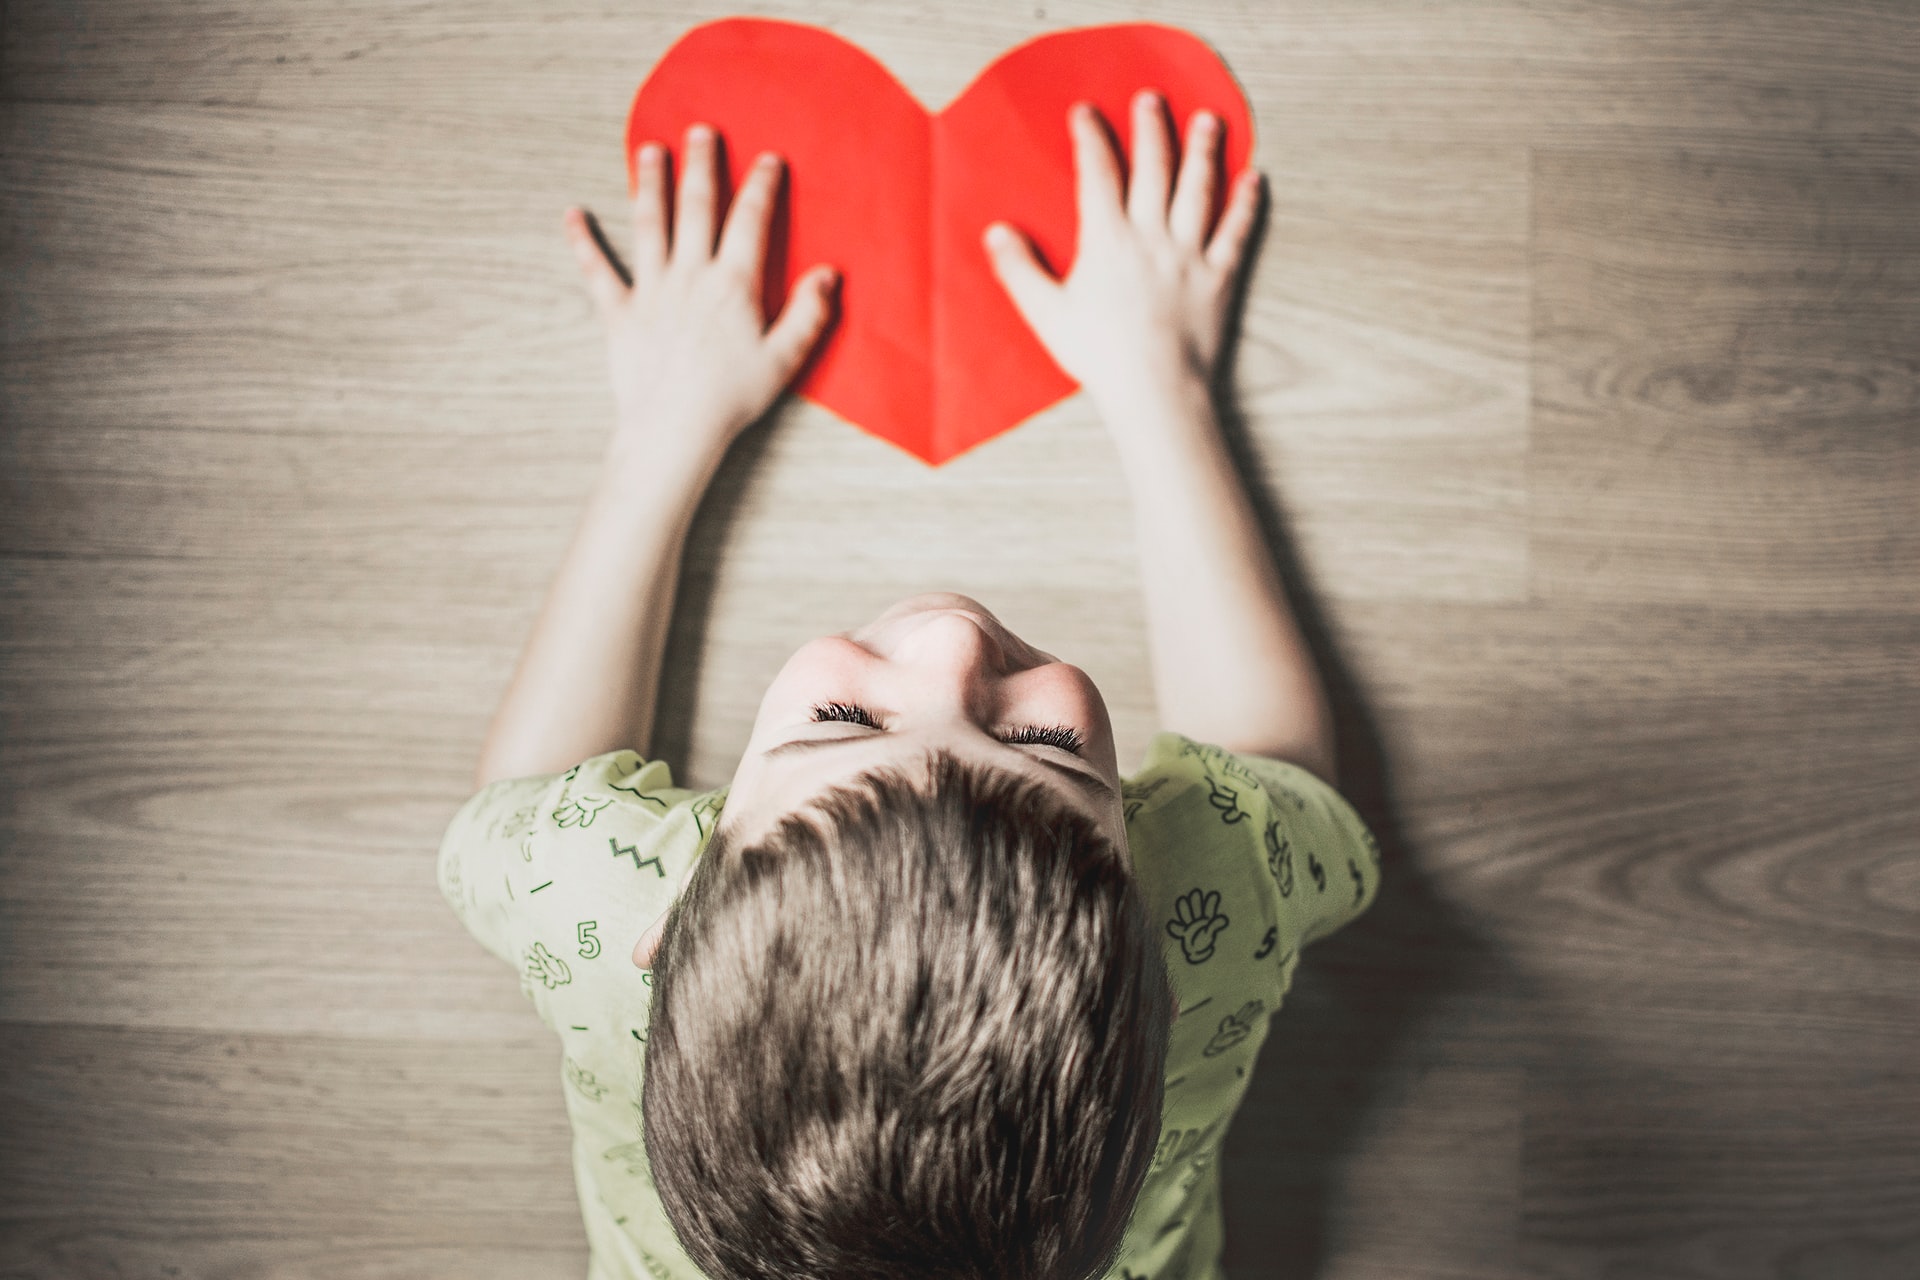 Young child holding a red heart made out of paper